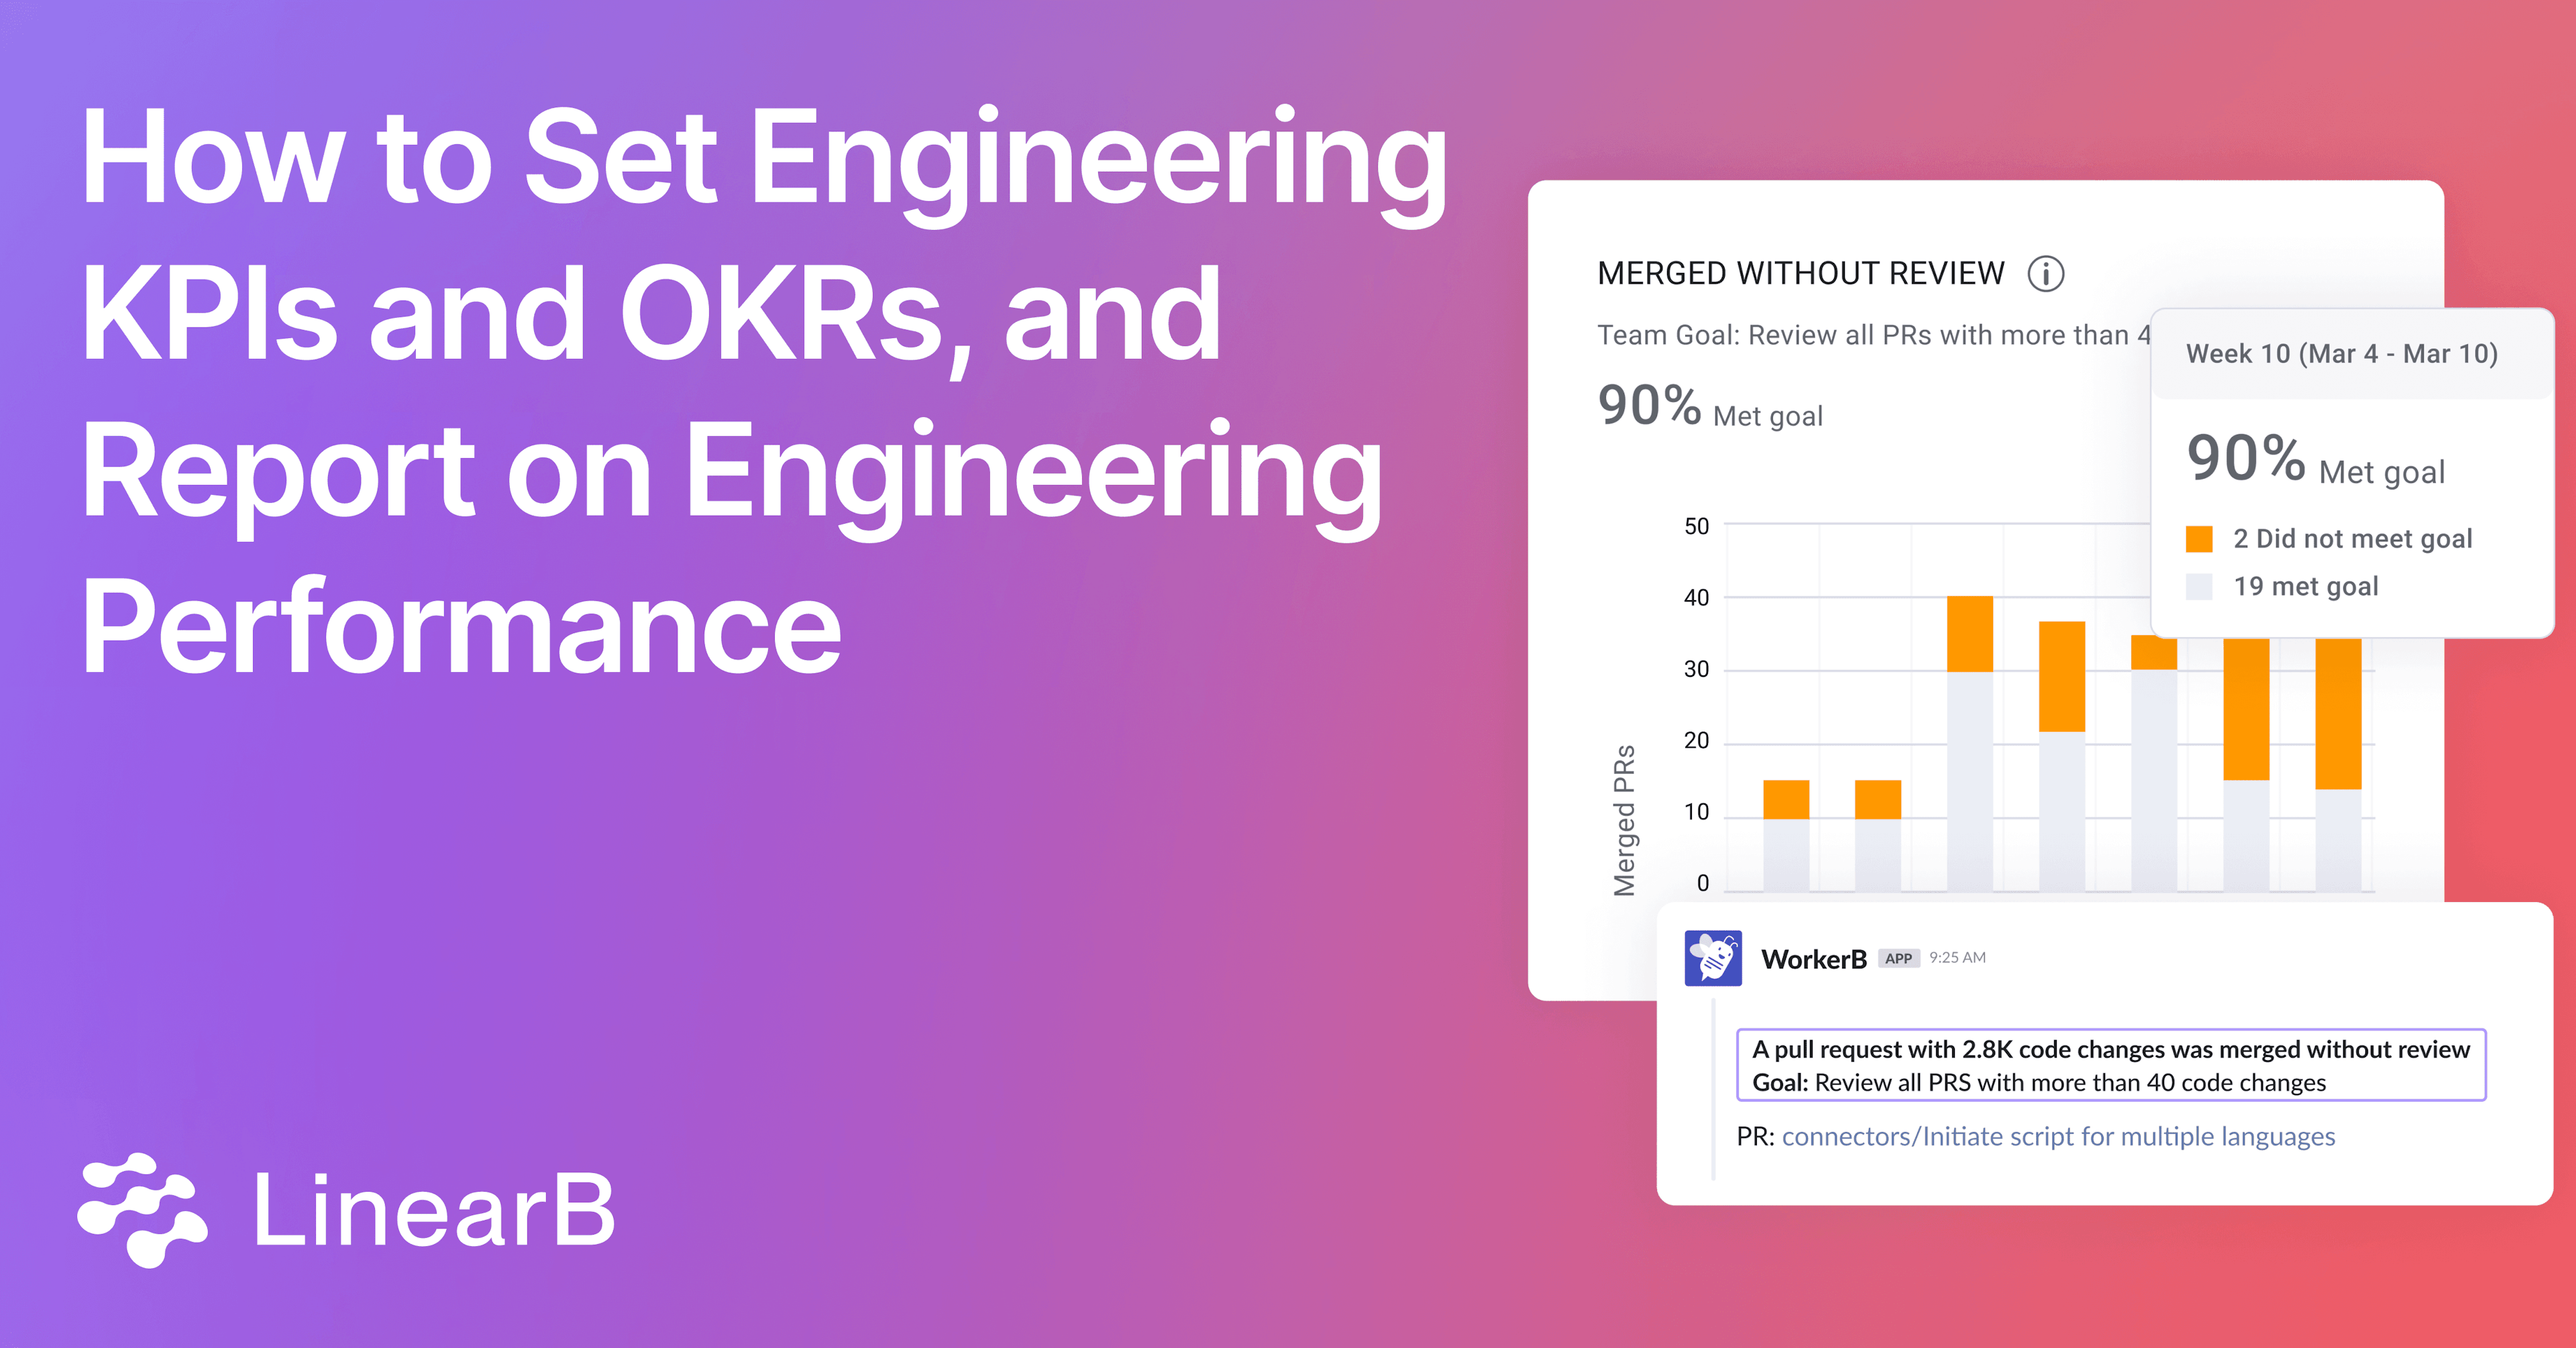 How to Set Engineering KPIs and OKRs, and Report on Engineering Performance